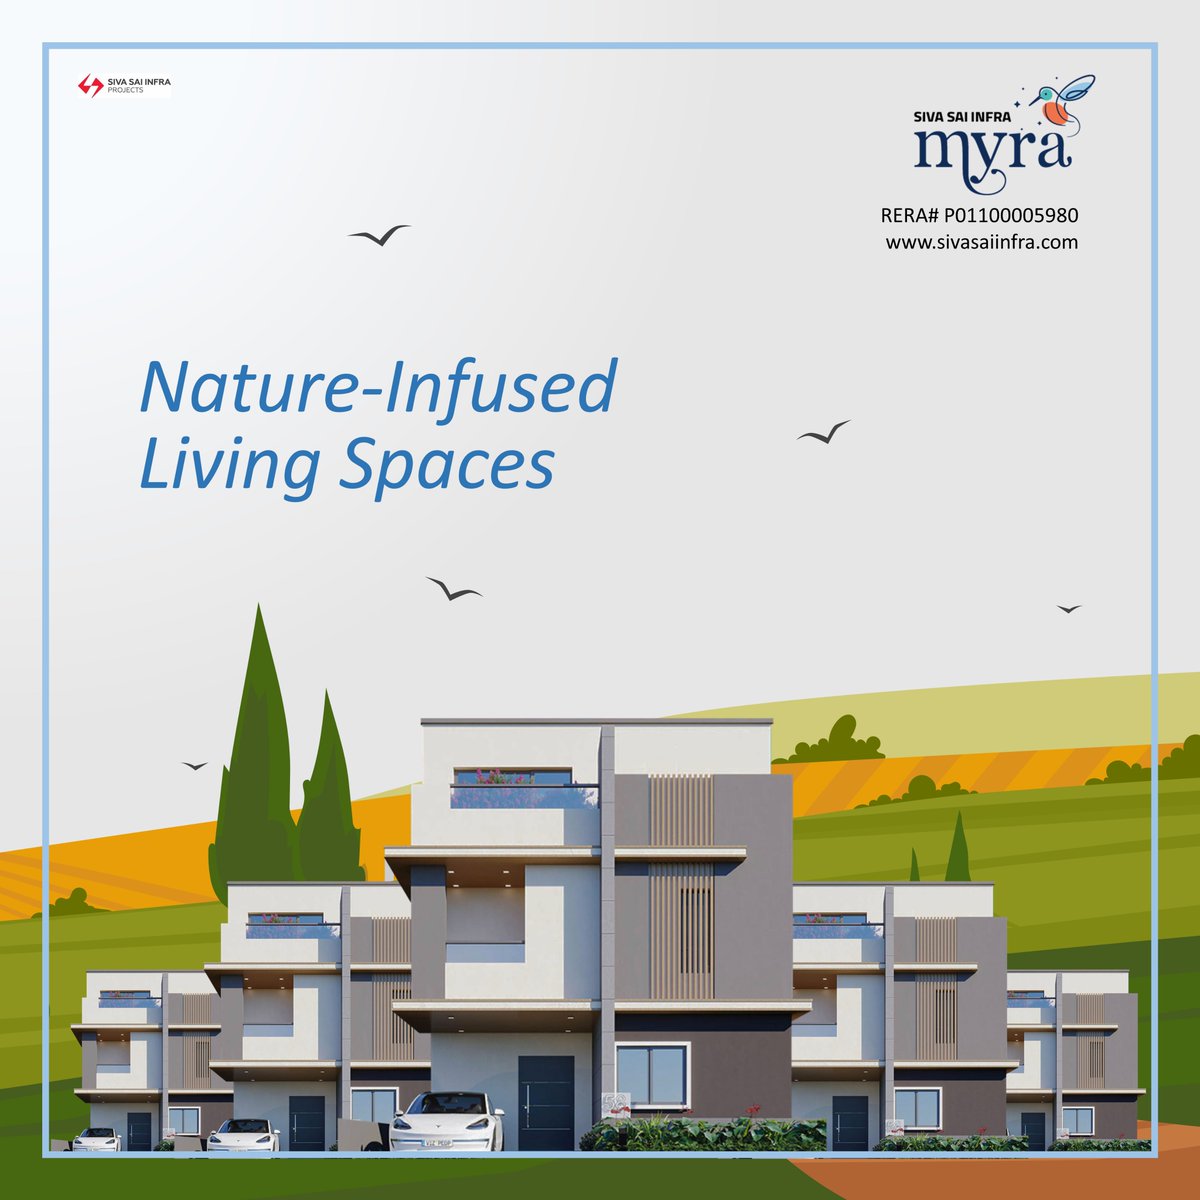 Where greenery thrives and nature meets design. Our communities prioritize open spaces, lush gardens, and green living for harmony with the environment.
#greenliving #GreenCommunities #SivaSaiInfra #MyraProjects #kollur #SivaSaiInfraproject #RealEstate